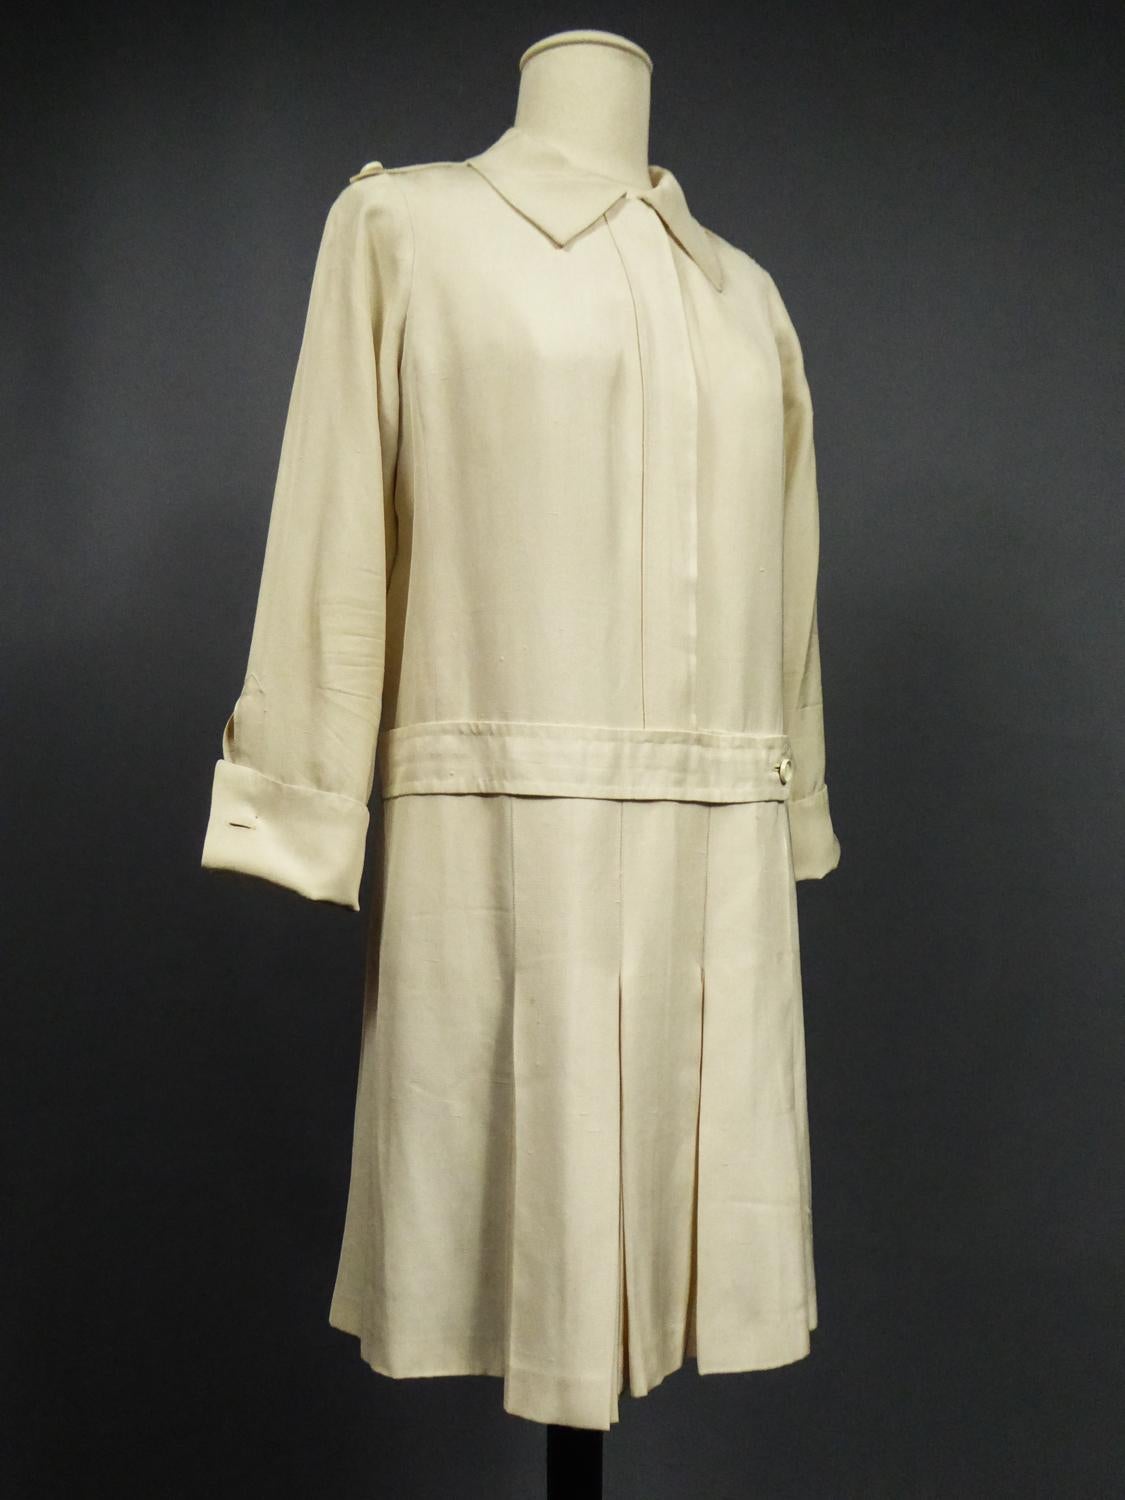 An Yves Saint Laurent Cocktail Dress Numbered 15193 - 1965 Collection 5